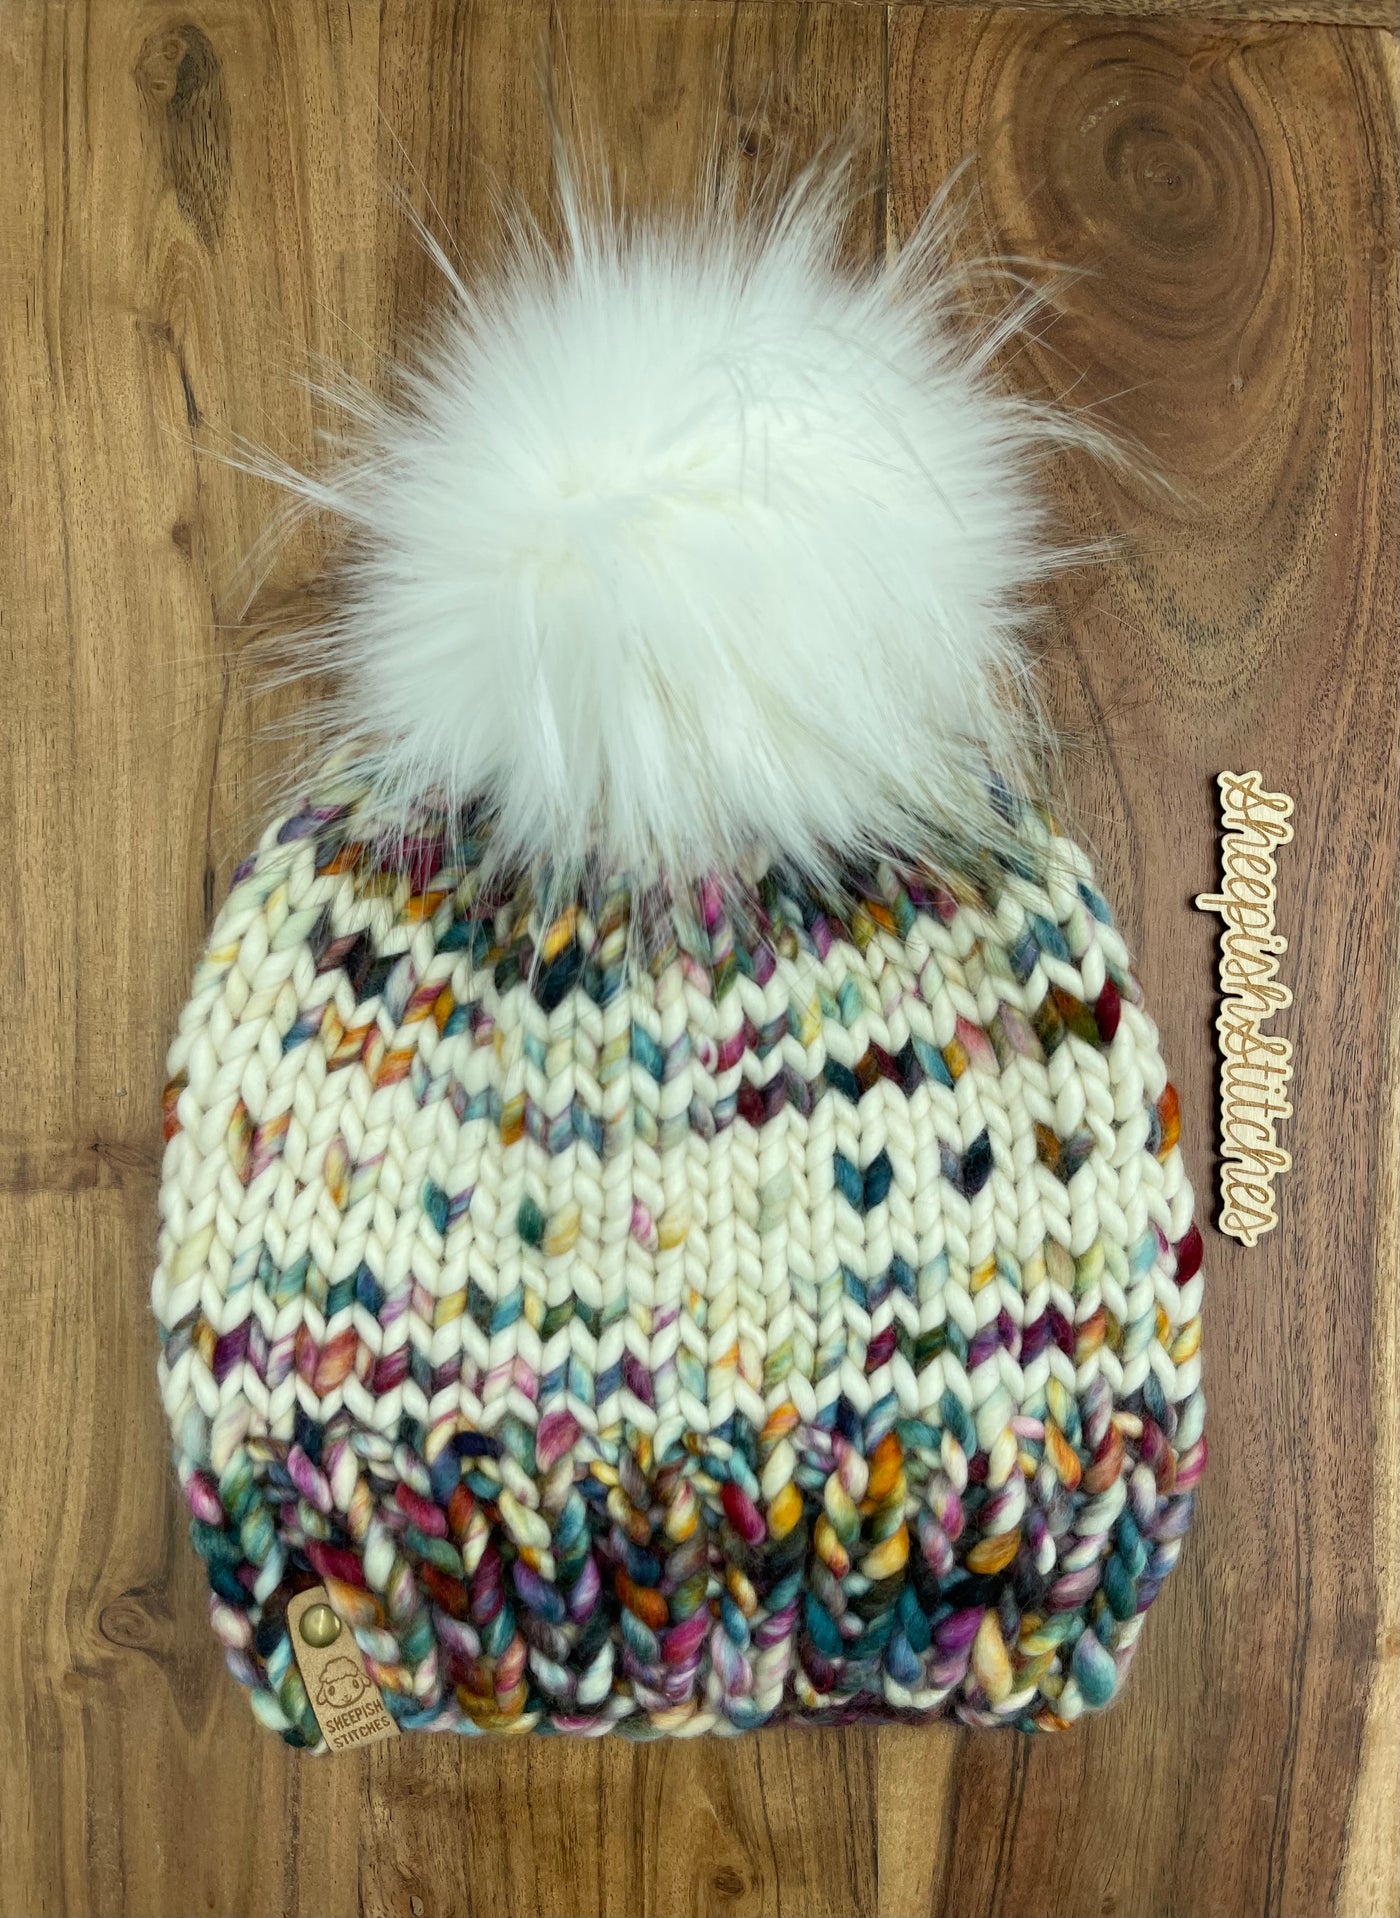 Multi Tone with Ivory Accent - Merino Wool Knit Hat with Faux Fur Pom Pom, Hand Knit Luxury Beanie, Ethically Sourced Merino Wool Toque